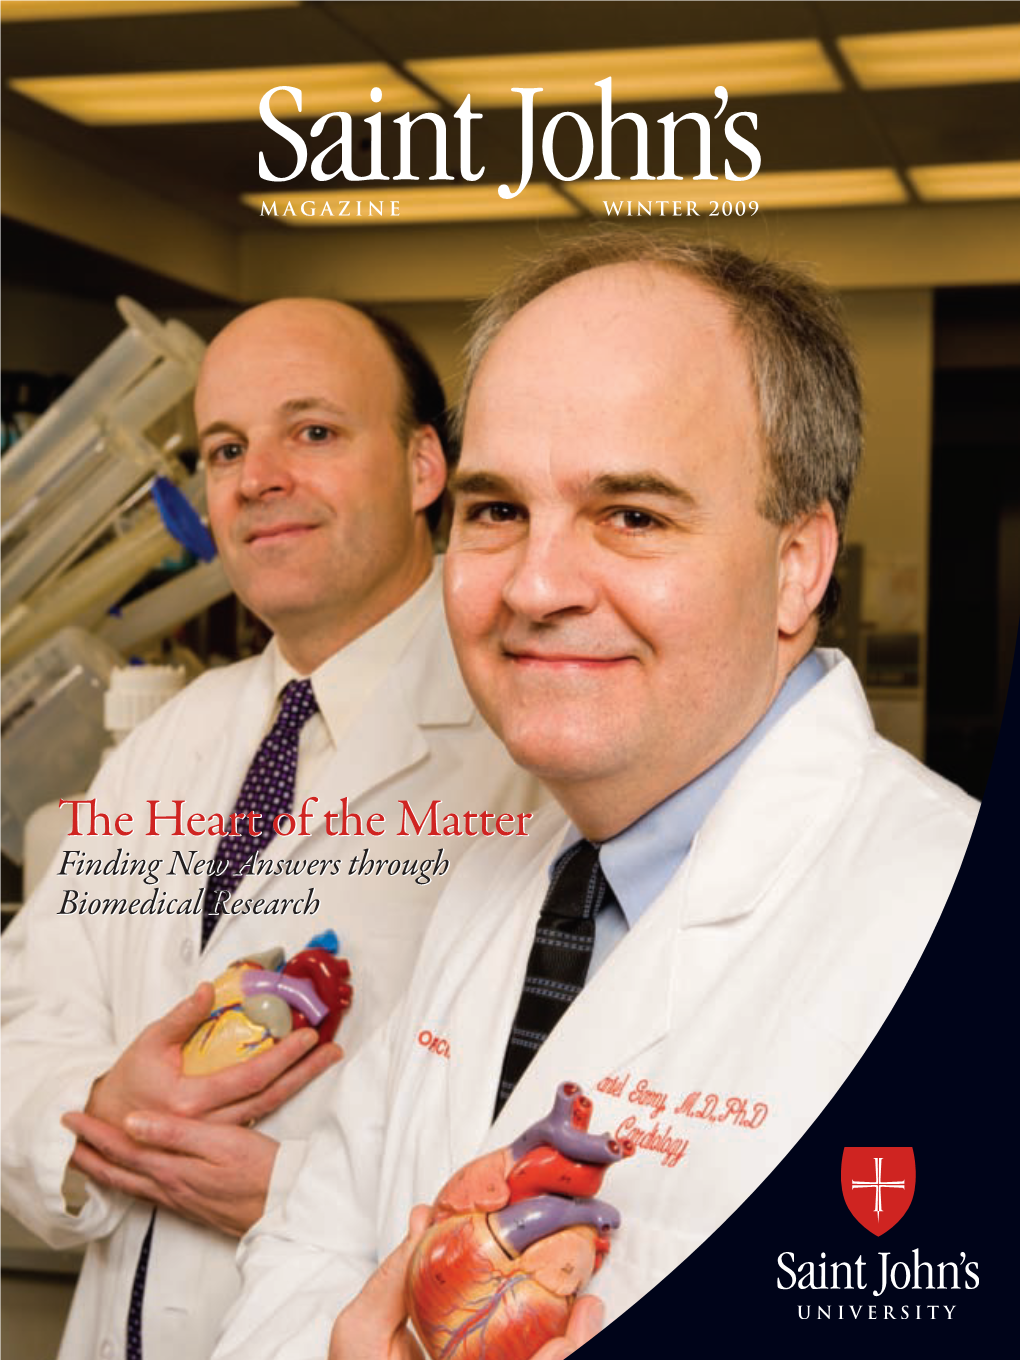 The Heart of the Matter Finding New Answers Through Biomedical Research